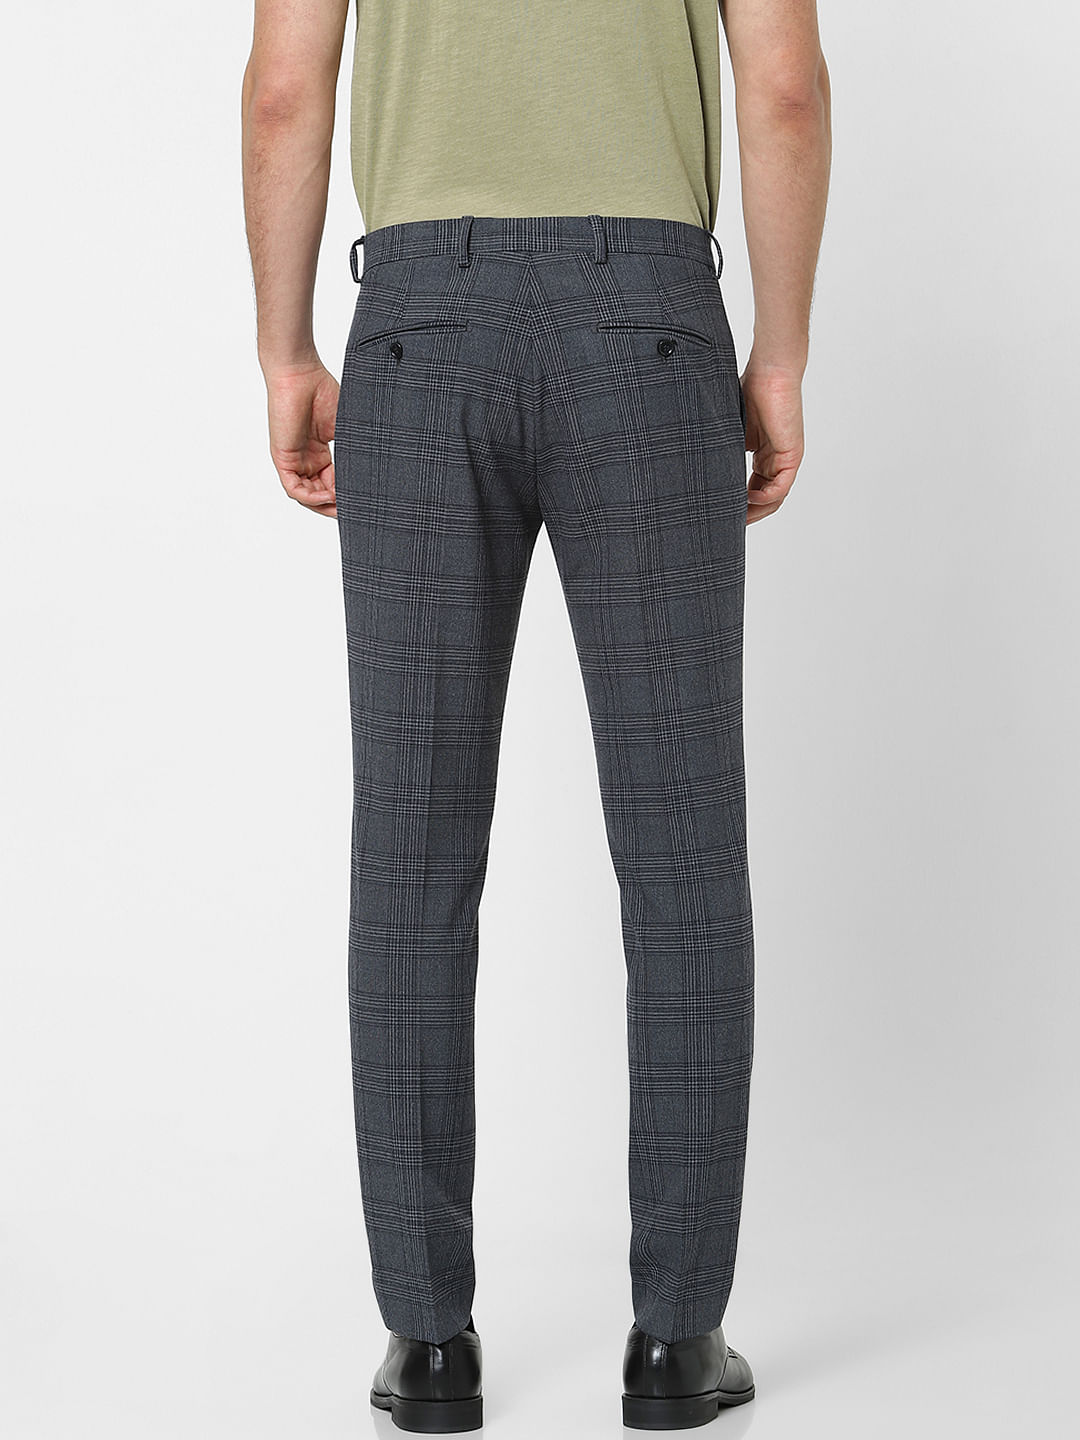 Buy Louis Philippe Grey Trousers Online  638484  Louis Philippe